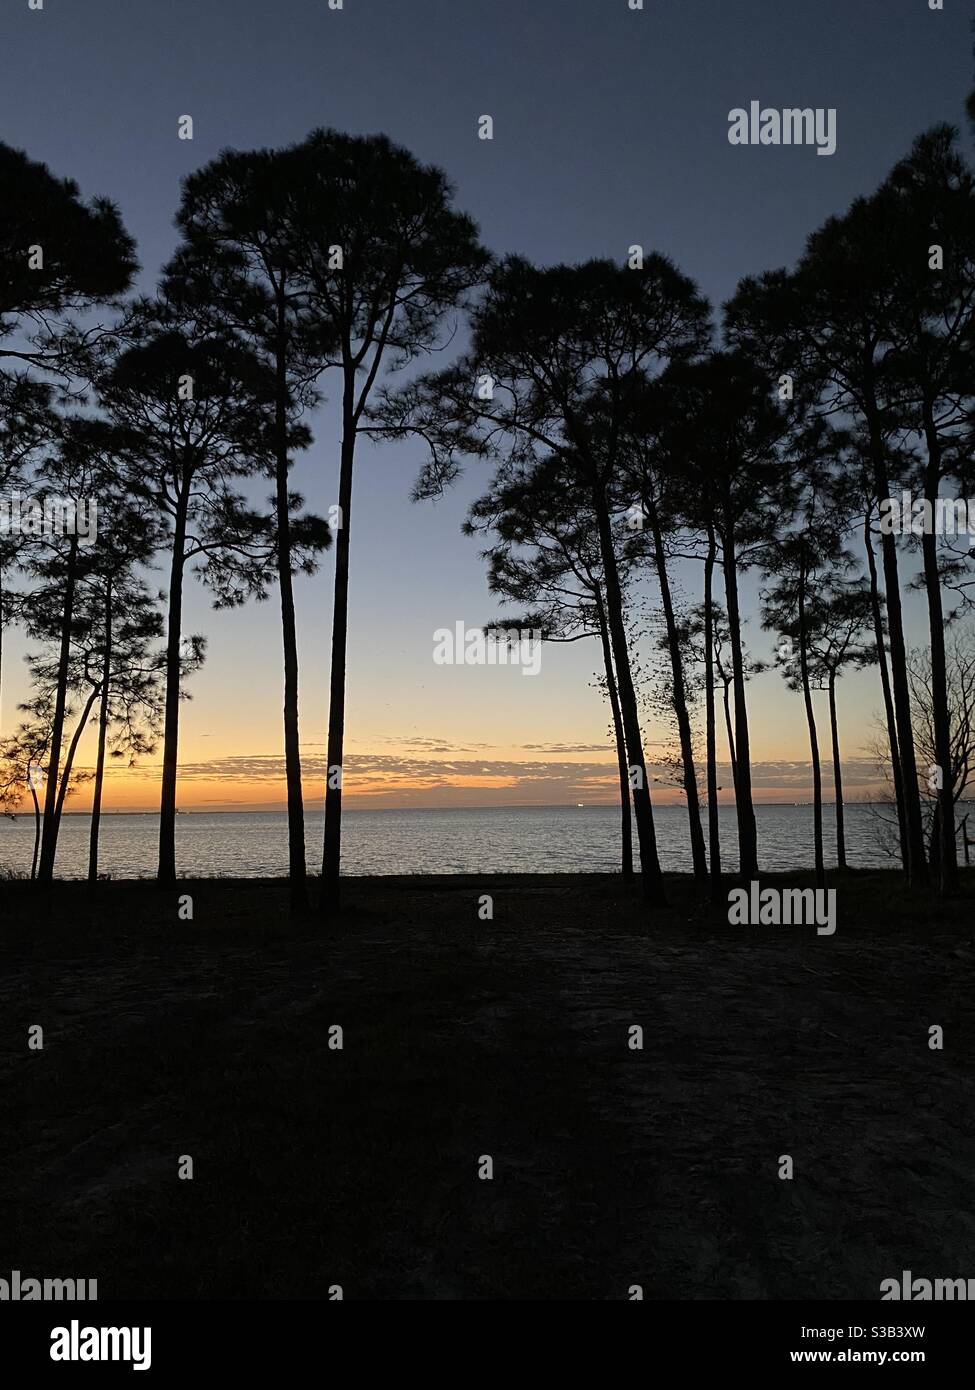 Silhouette tall pine trees at sunset with view of bay water Stock Photo